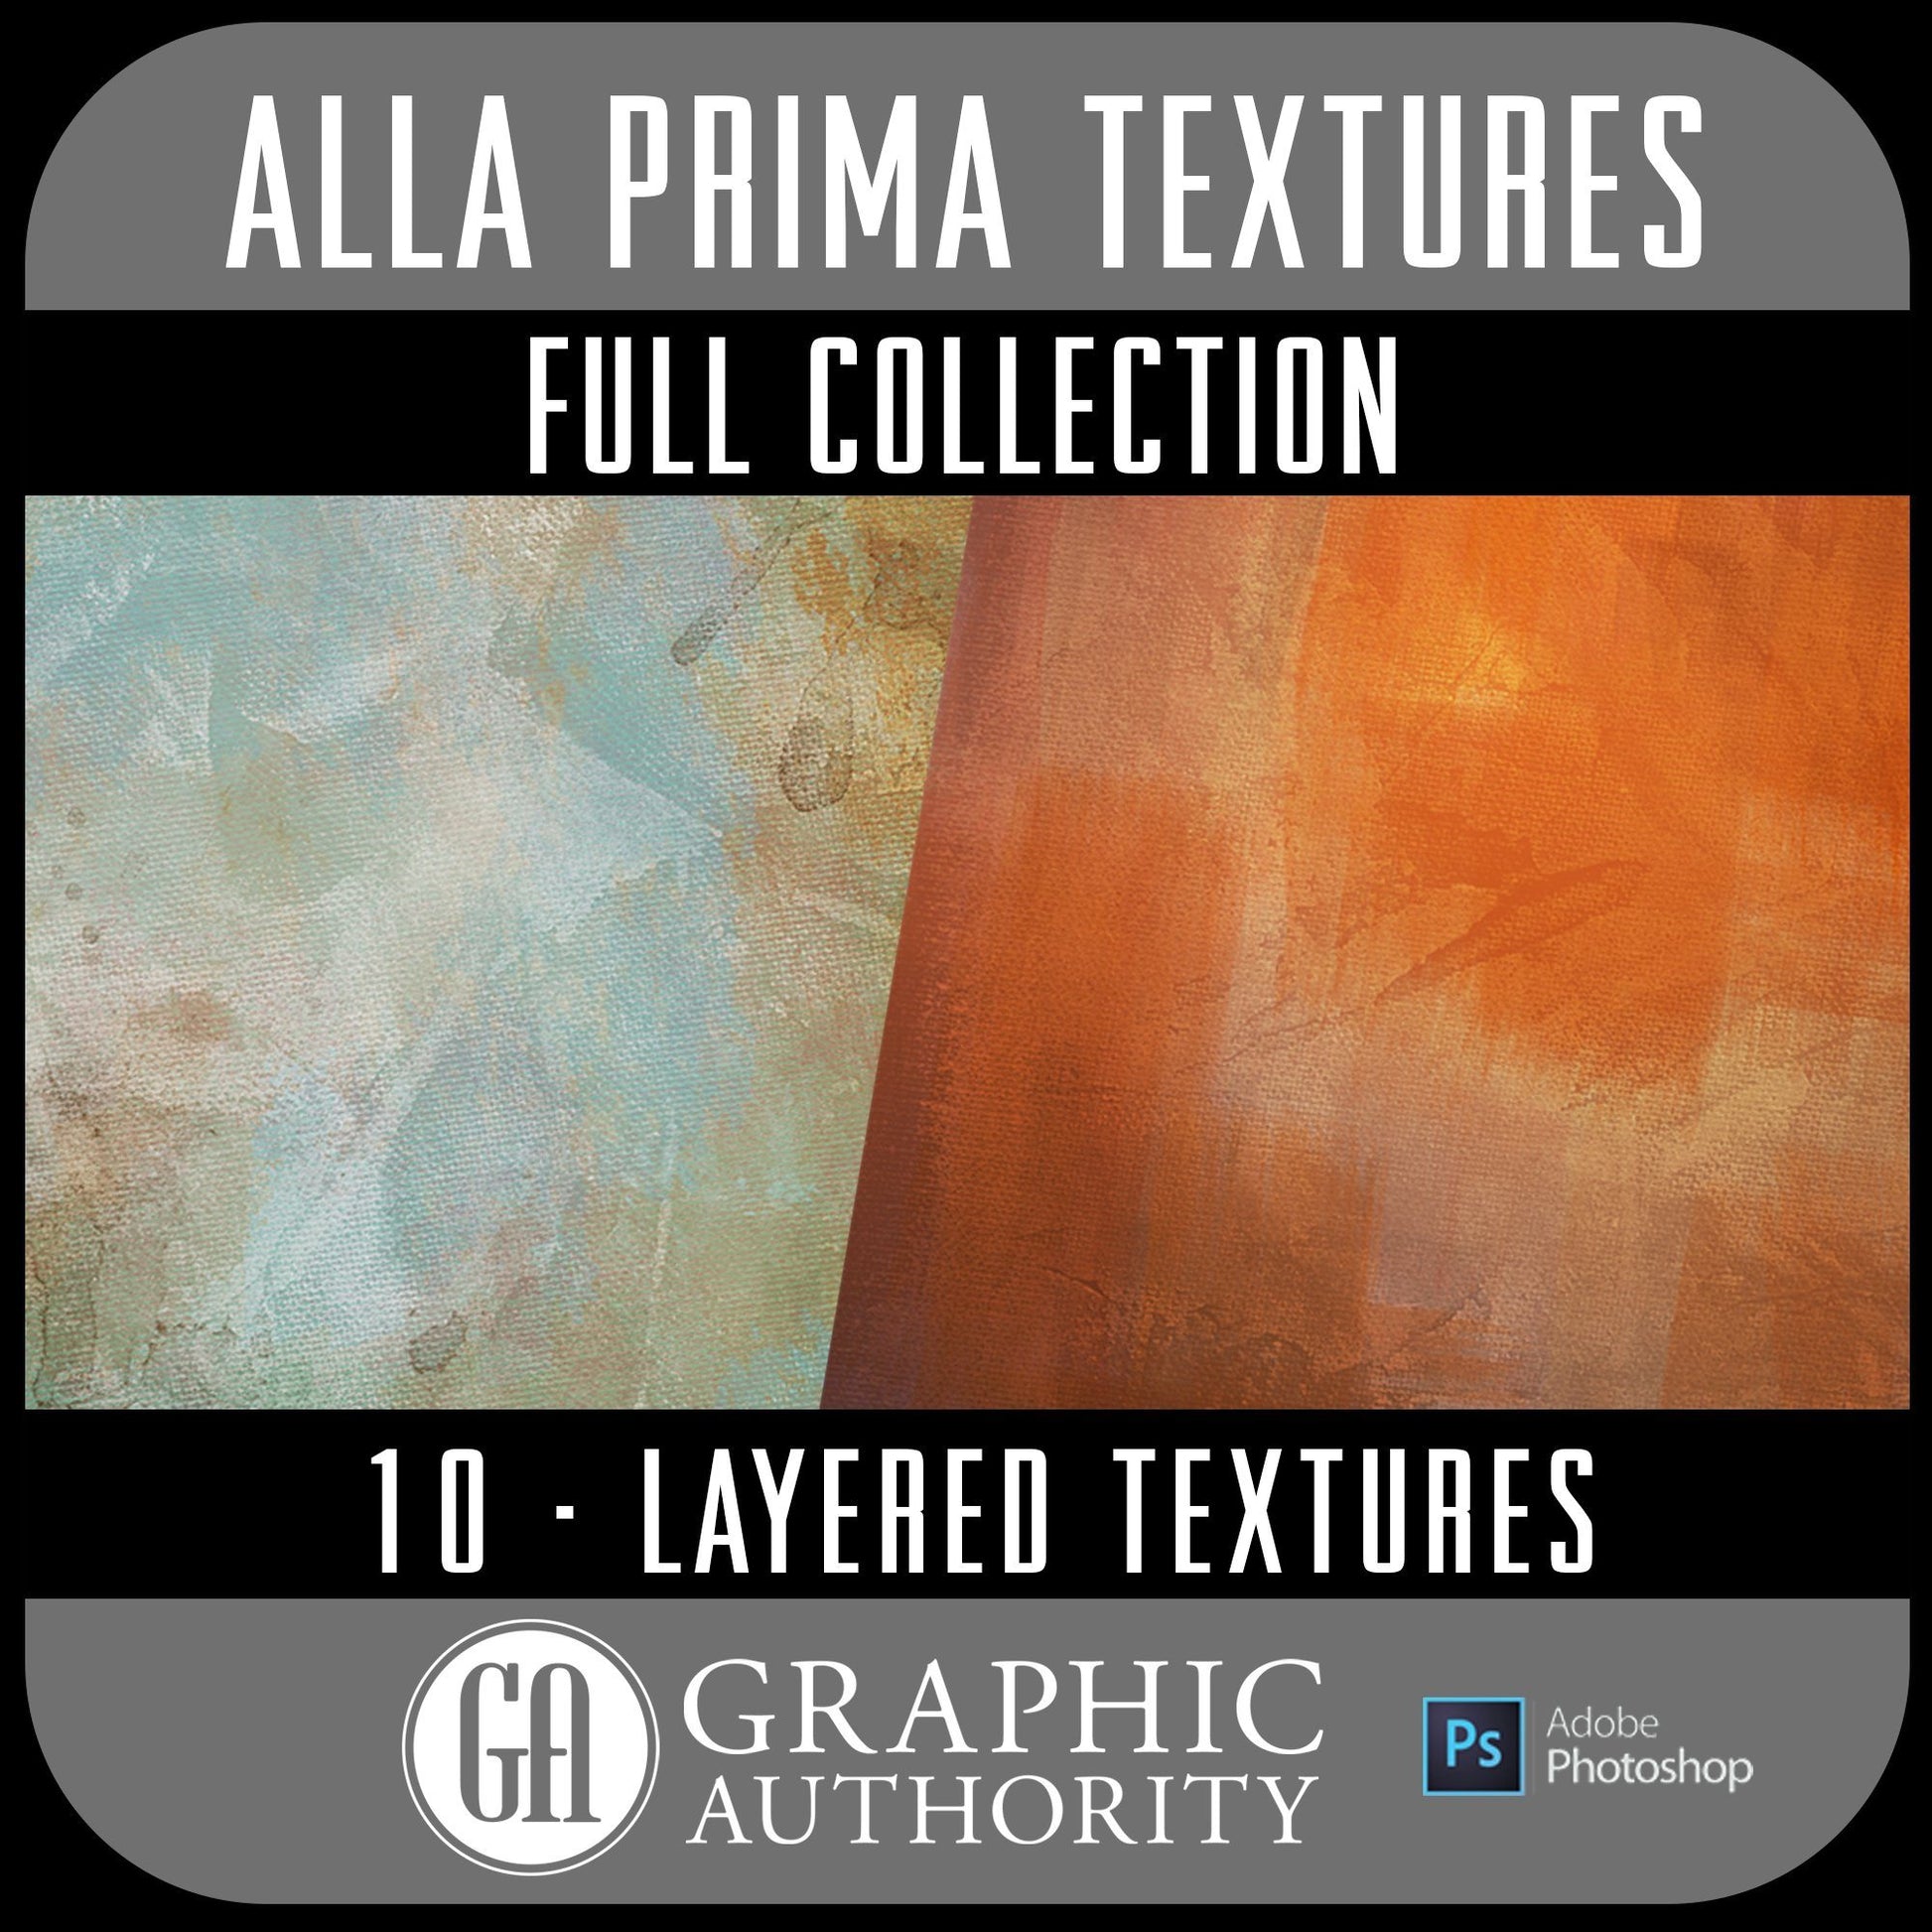 Alla Prima - Layered Textures - Full Collection-Photoshop Template - Graphic Authority